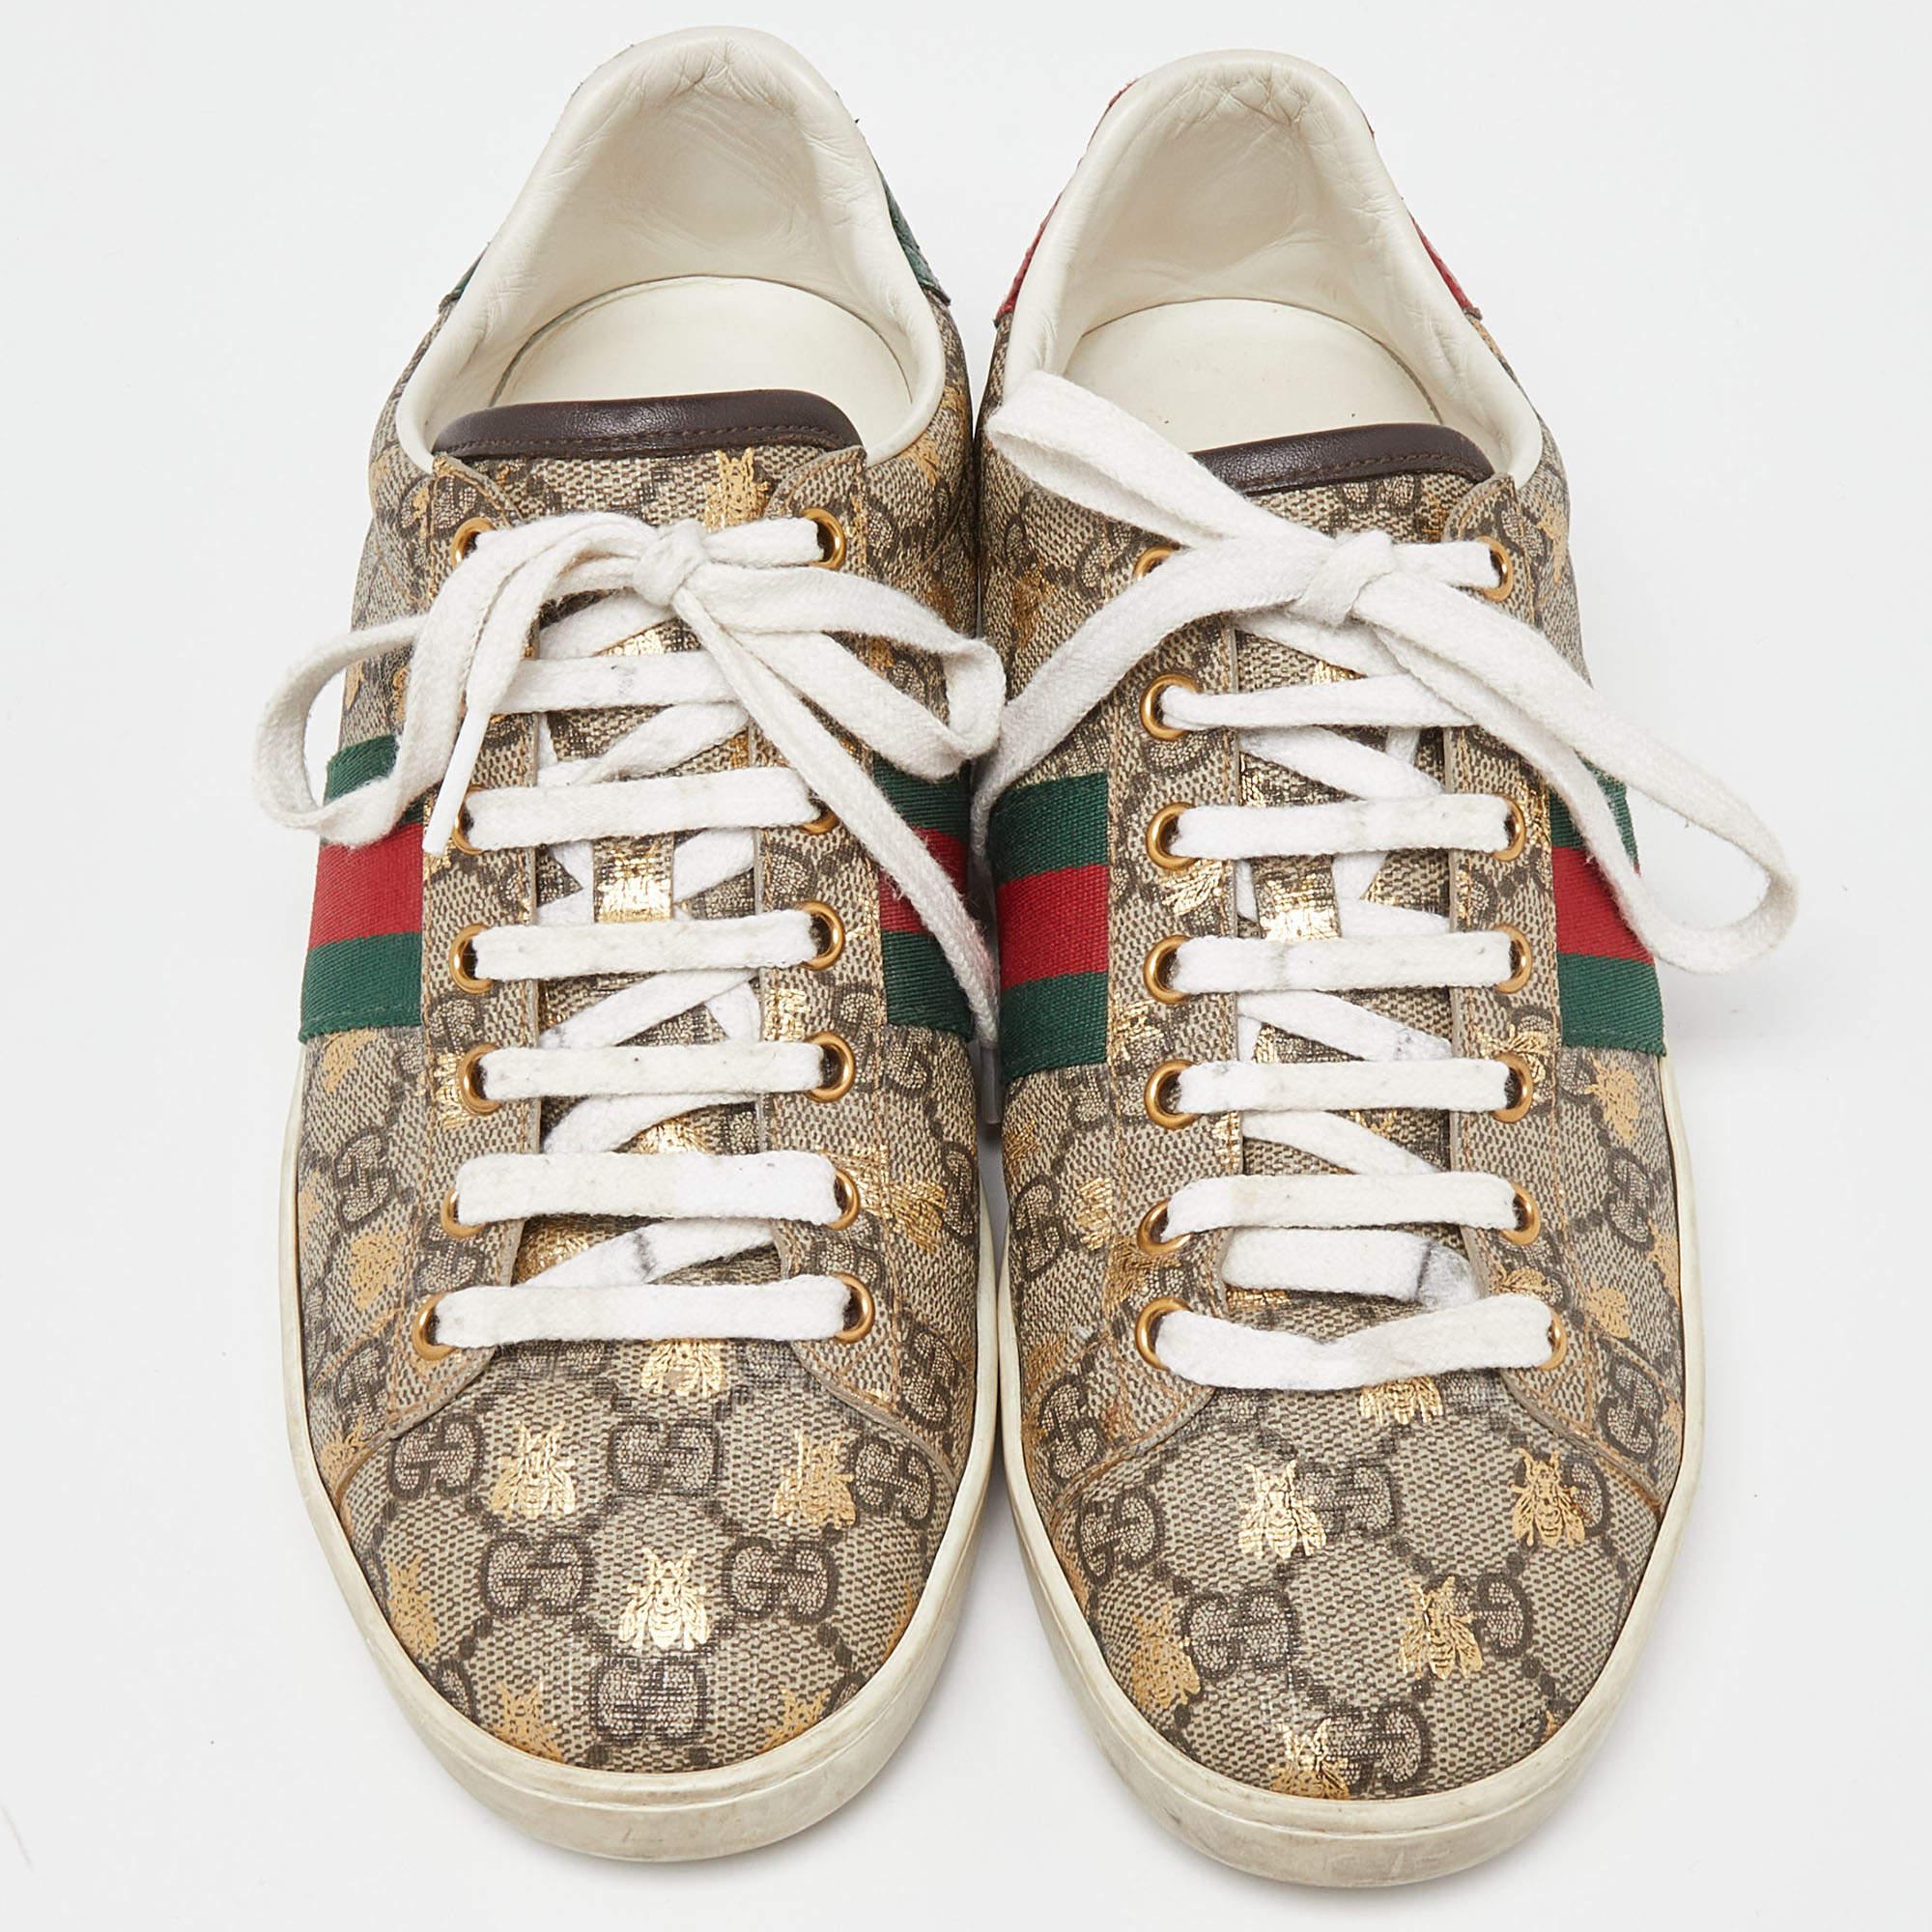 Men's Gucci Beige GG Supreme Canvas Bee Print Ace Low Top Sneakers Size 39